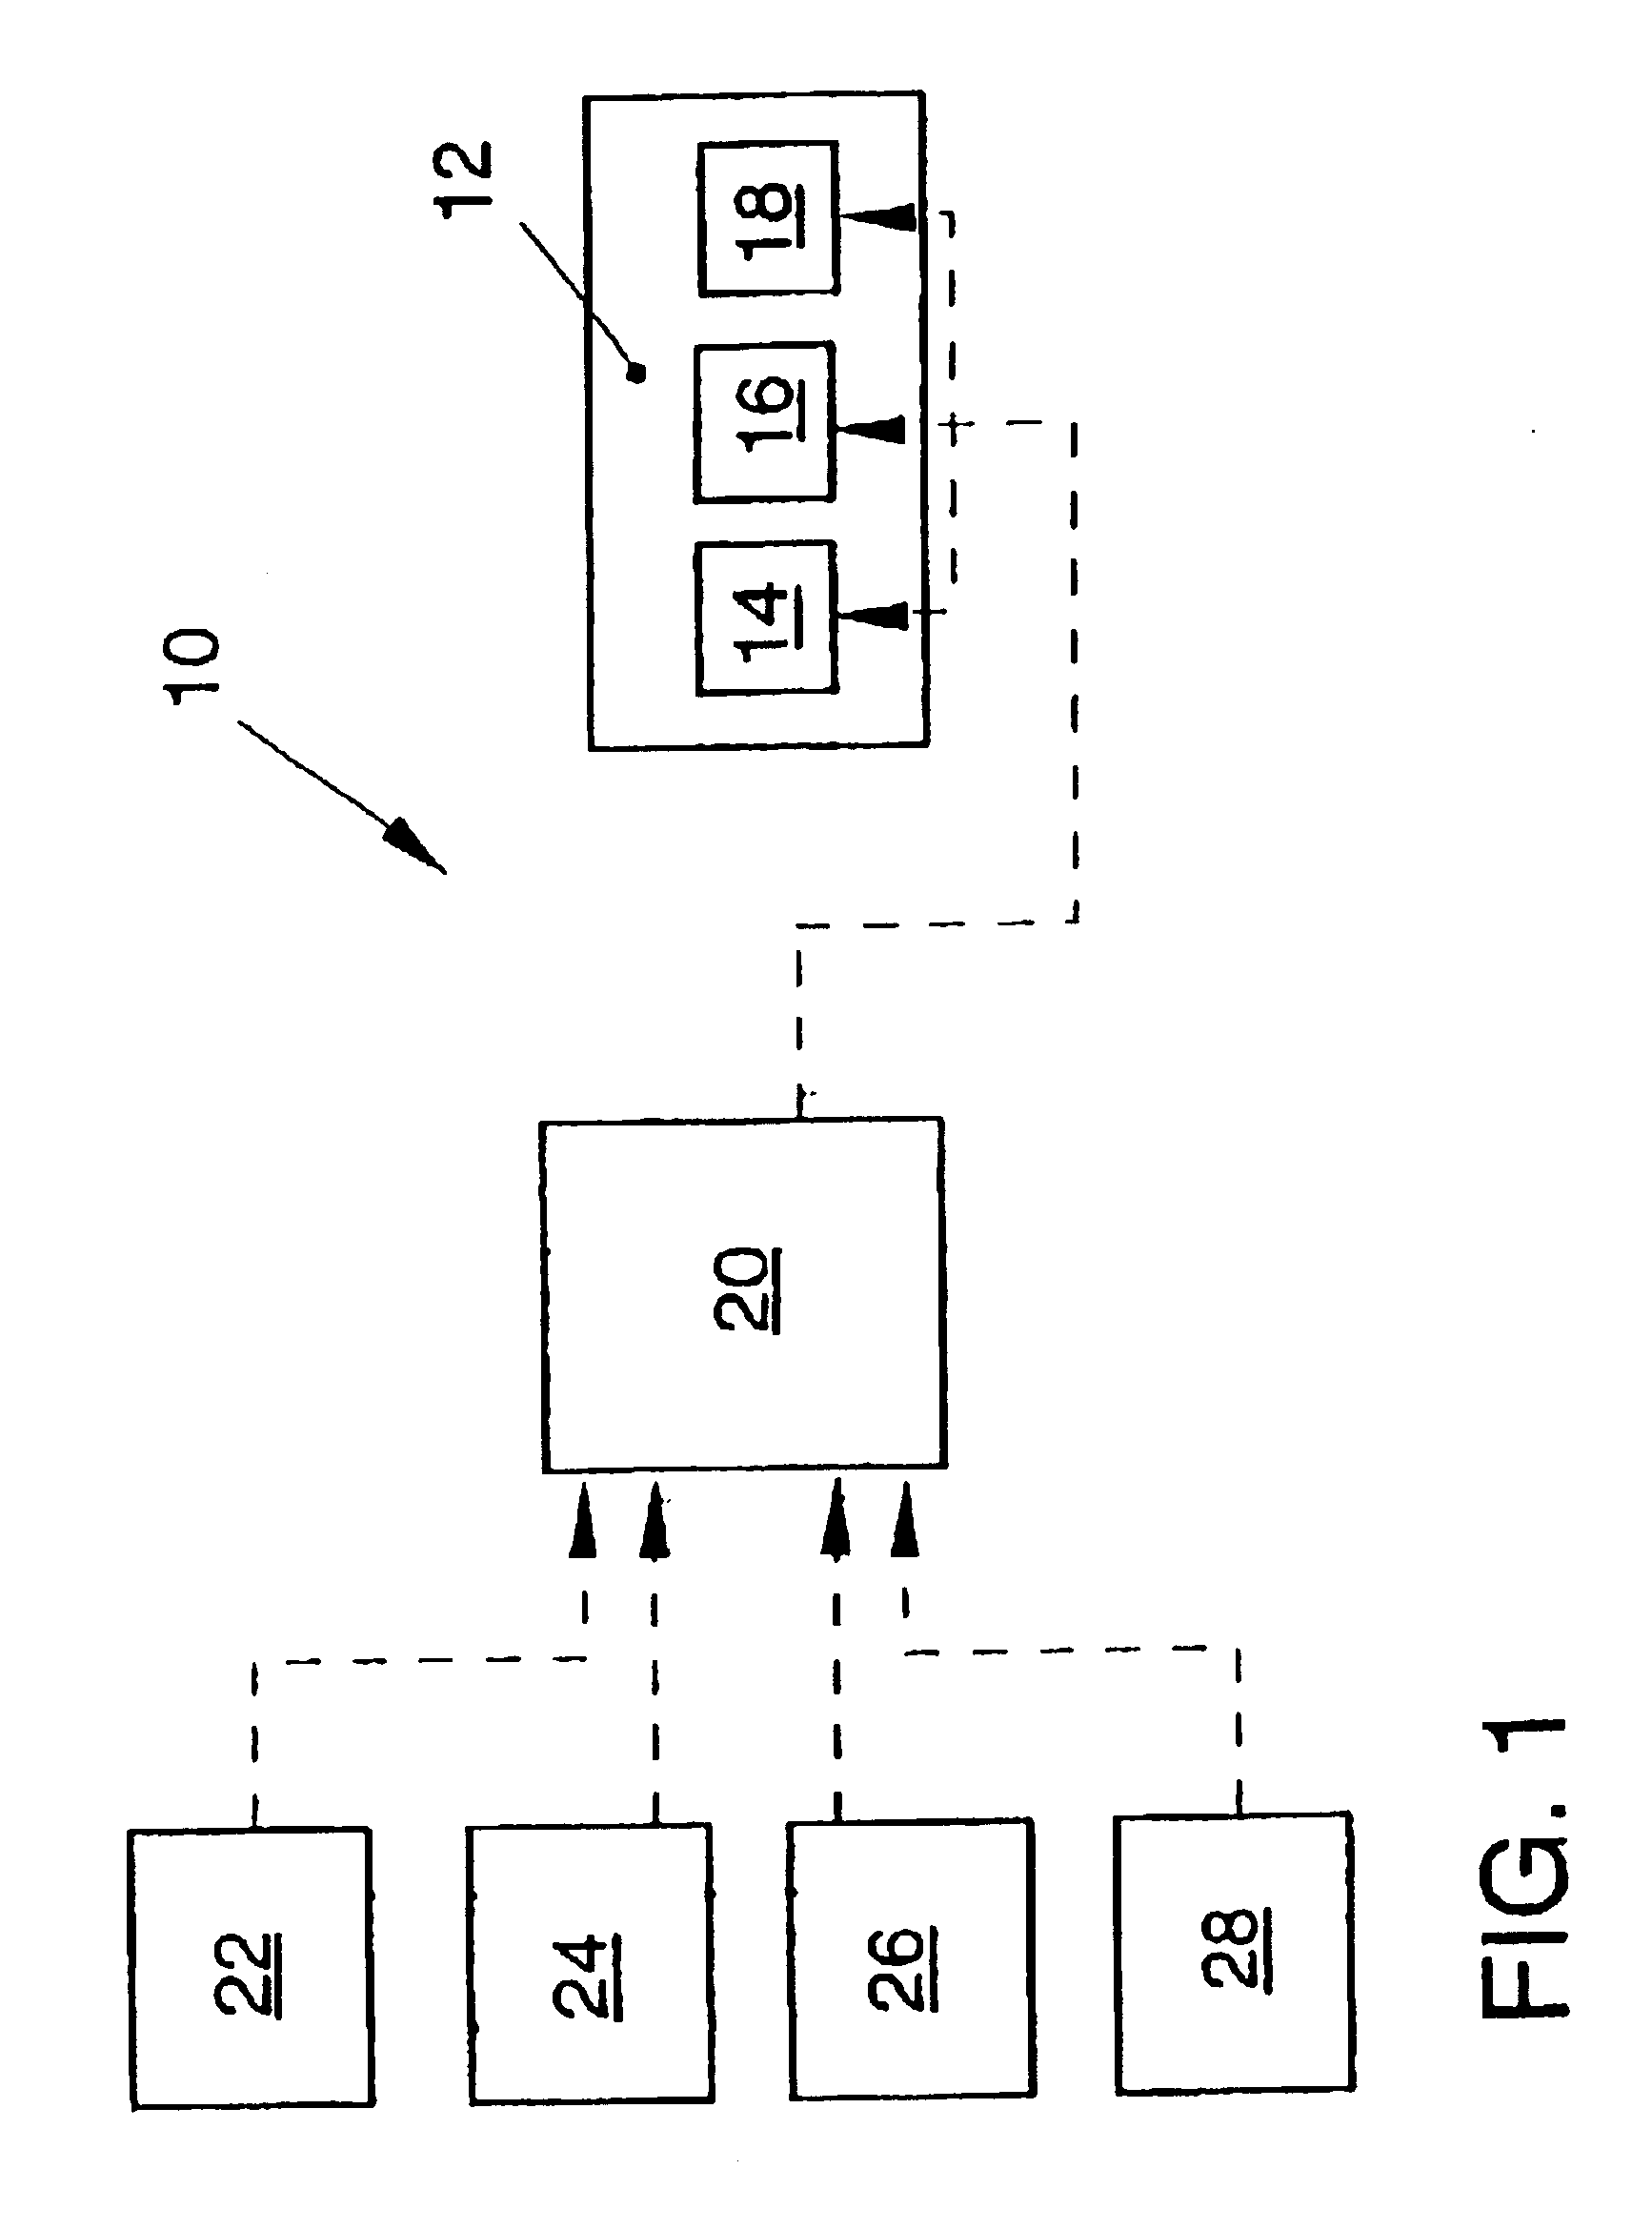 Interior lighting system of a motor vehicle and a method for controlling the same